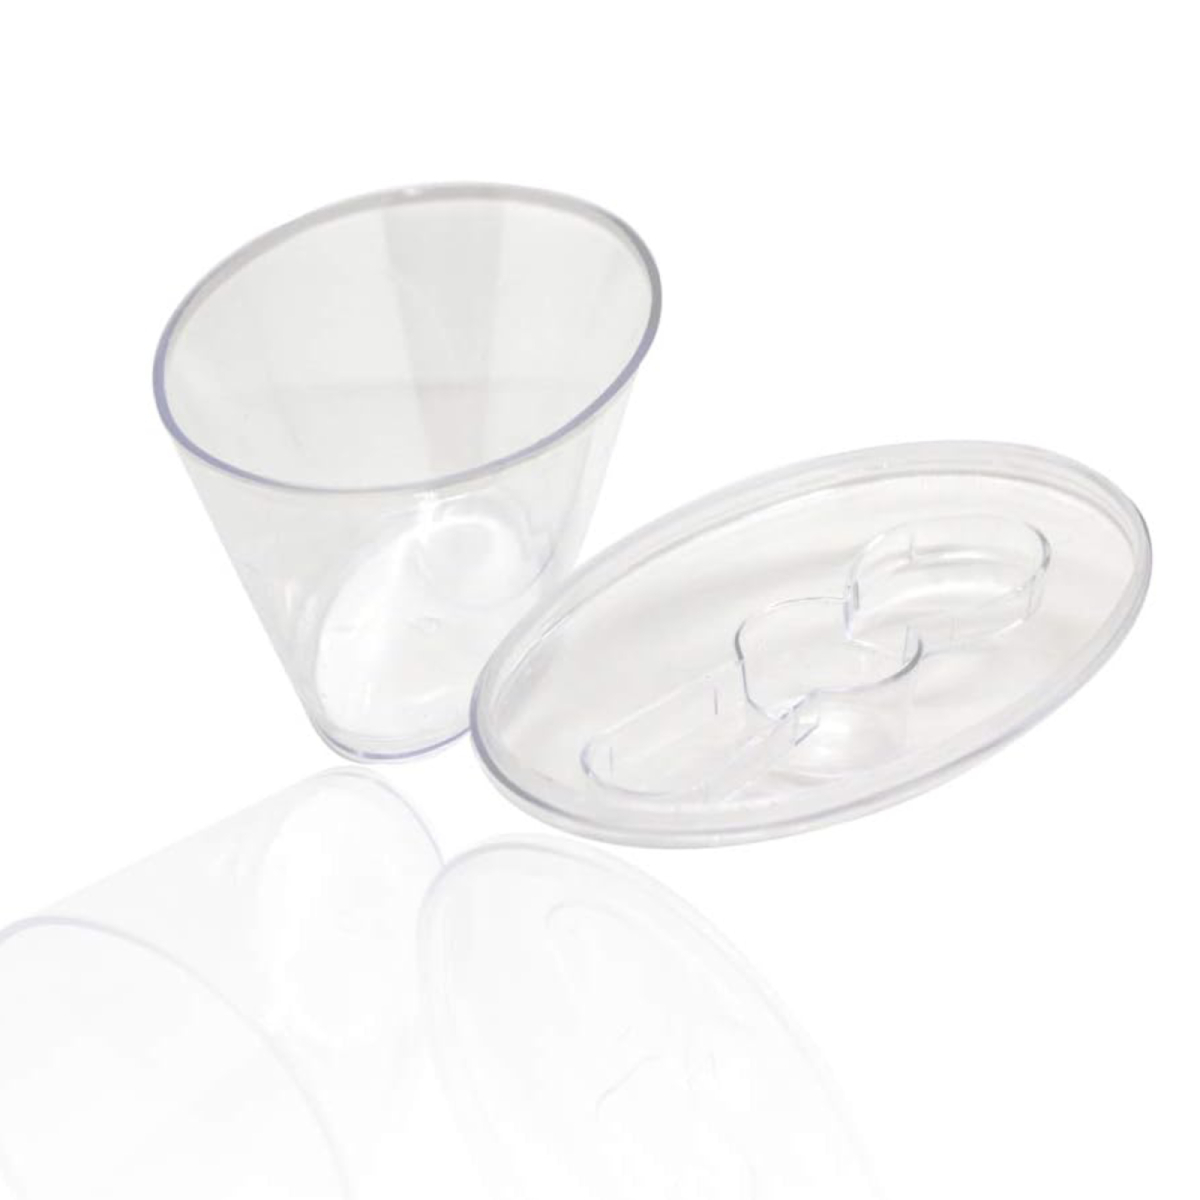 Platinum Care Oval Dish With Lid & Spoon 20 pcs